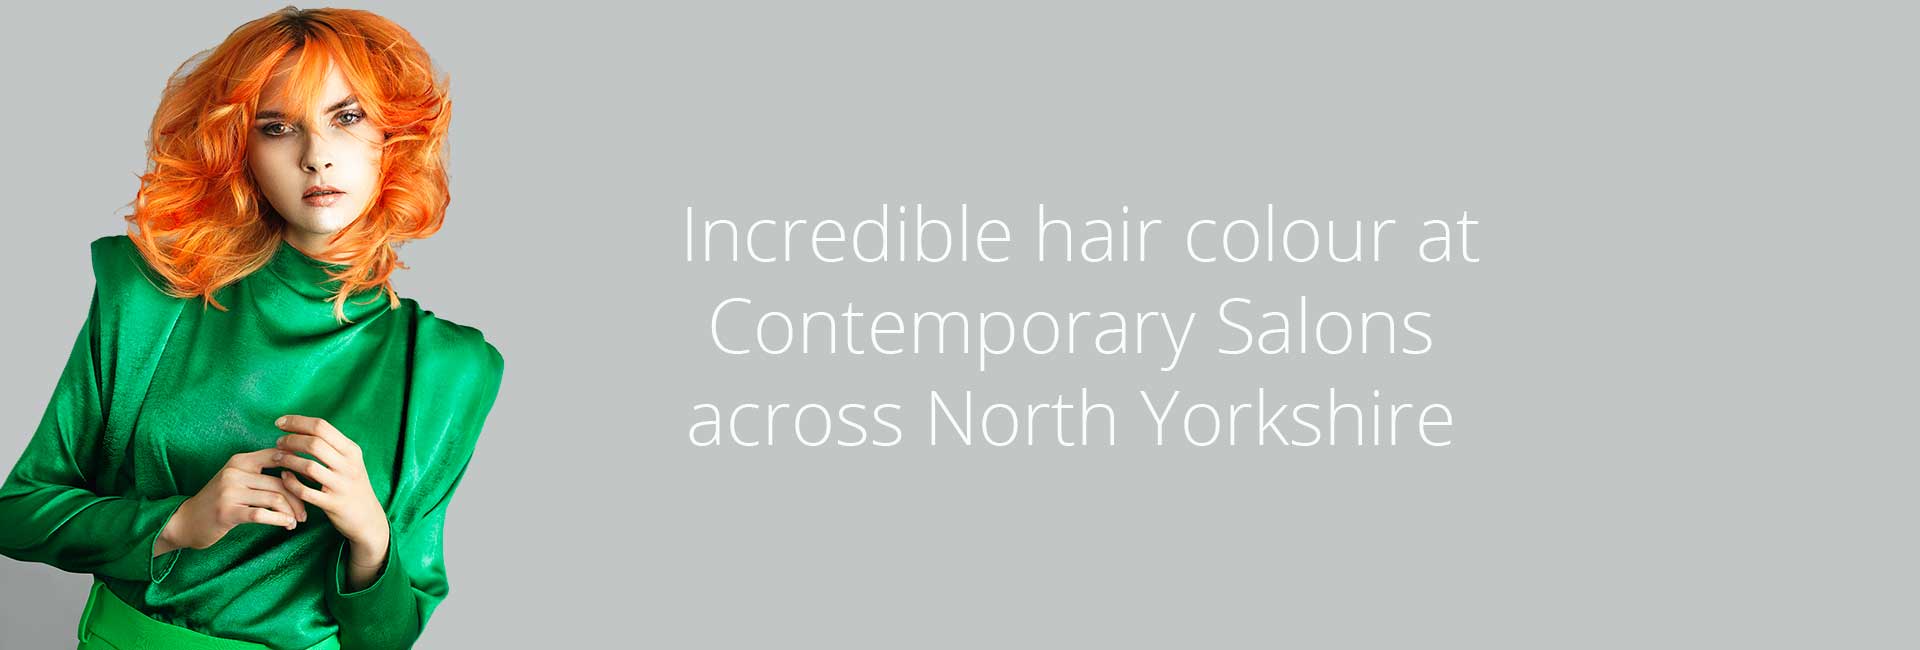 Incredible hair colour at Contemporary Salons across North Yorkshire 1